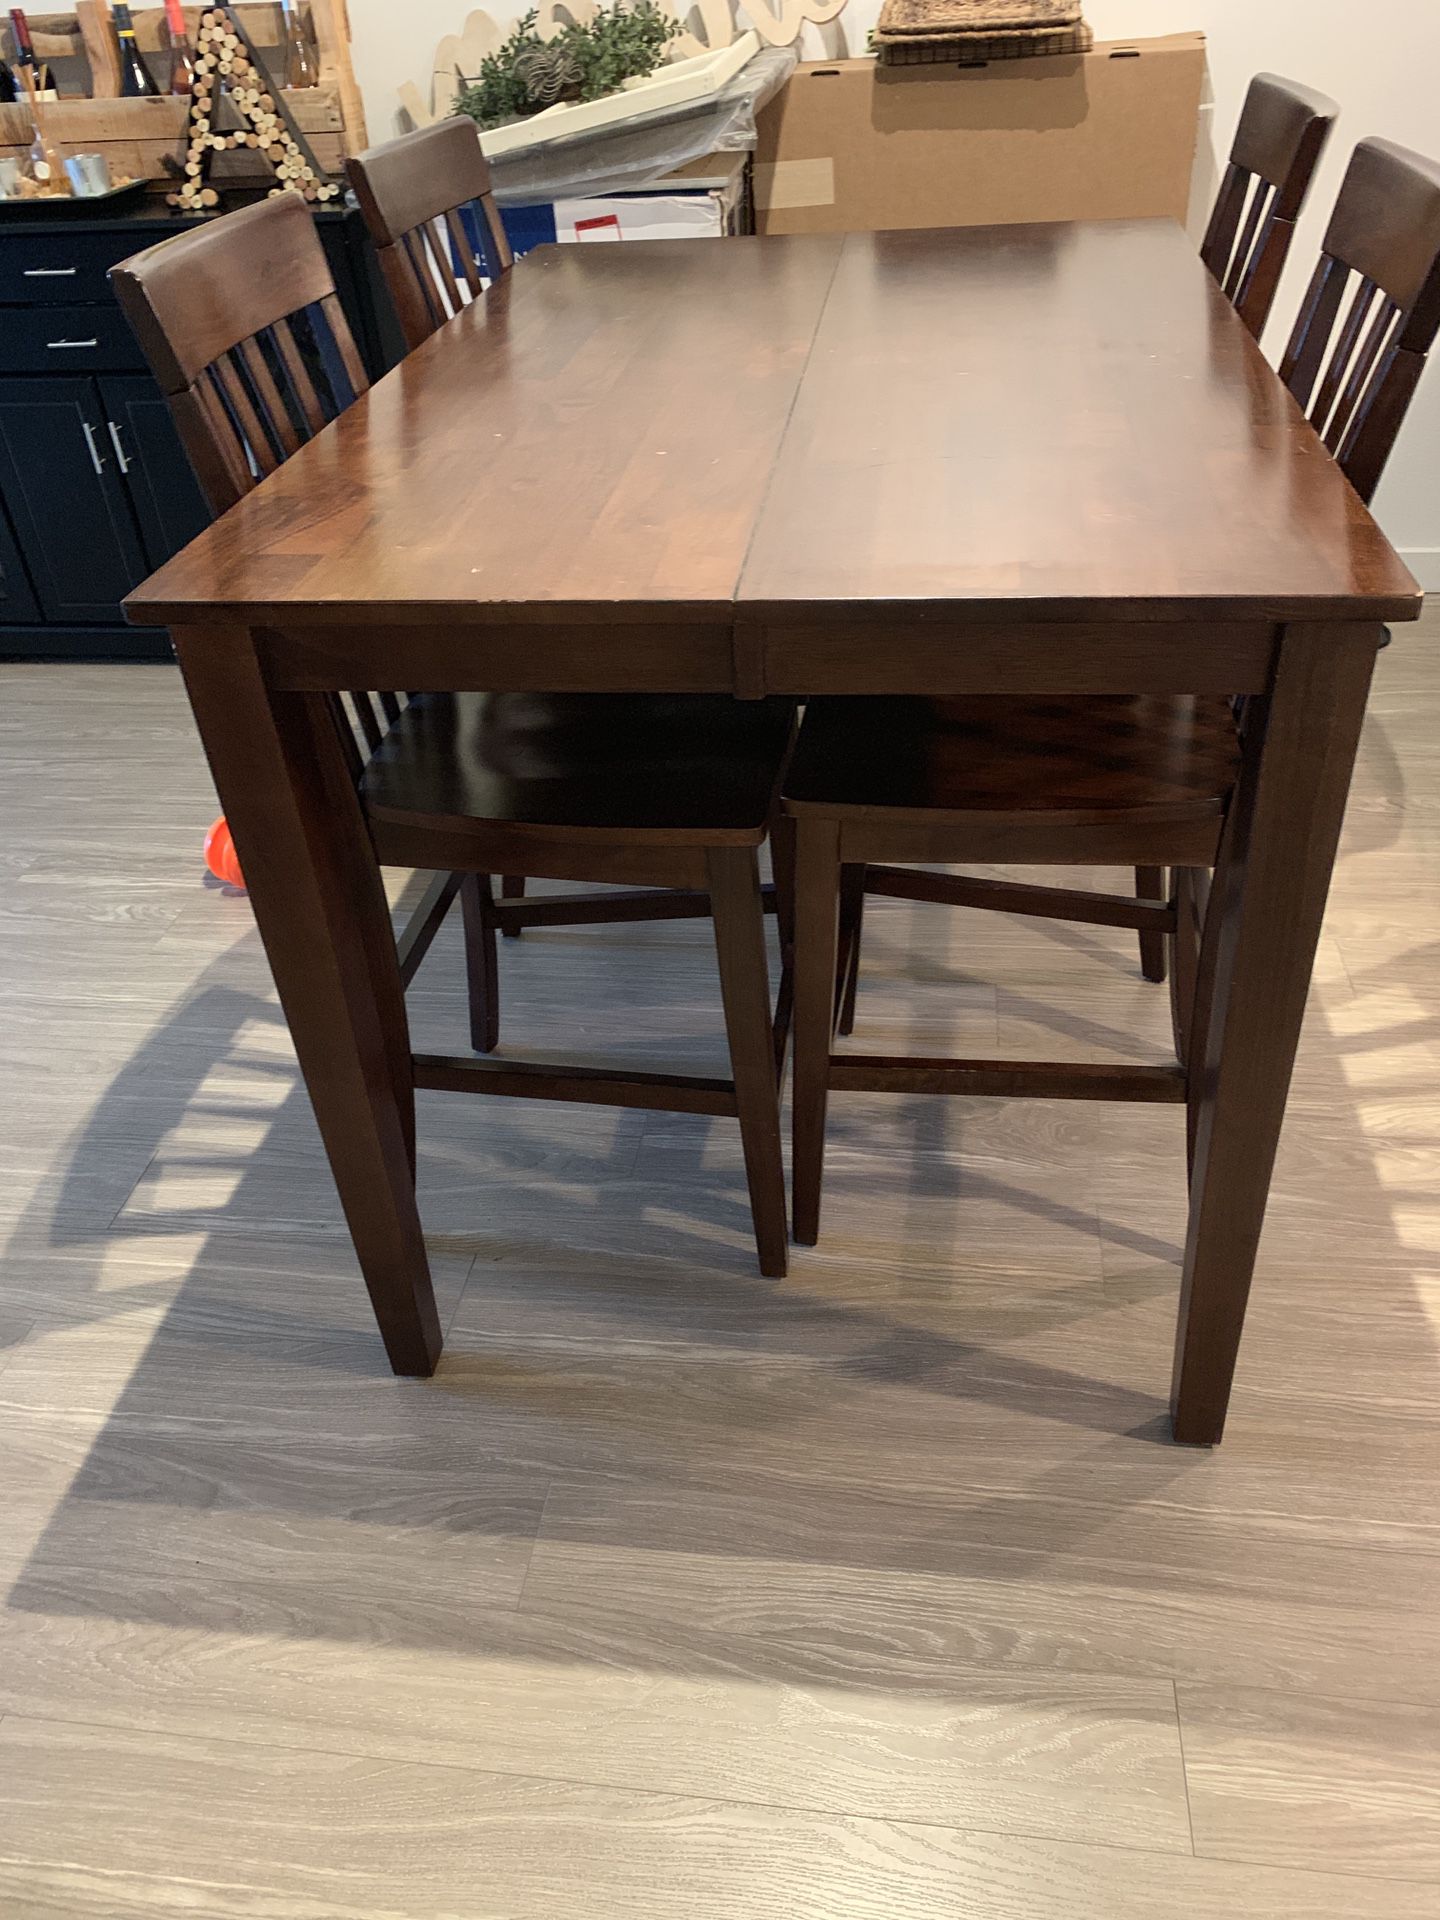 Solid wood, tall Kitchen Table with detachable leaf insert and 4 chairs.